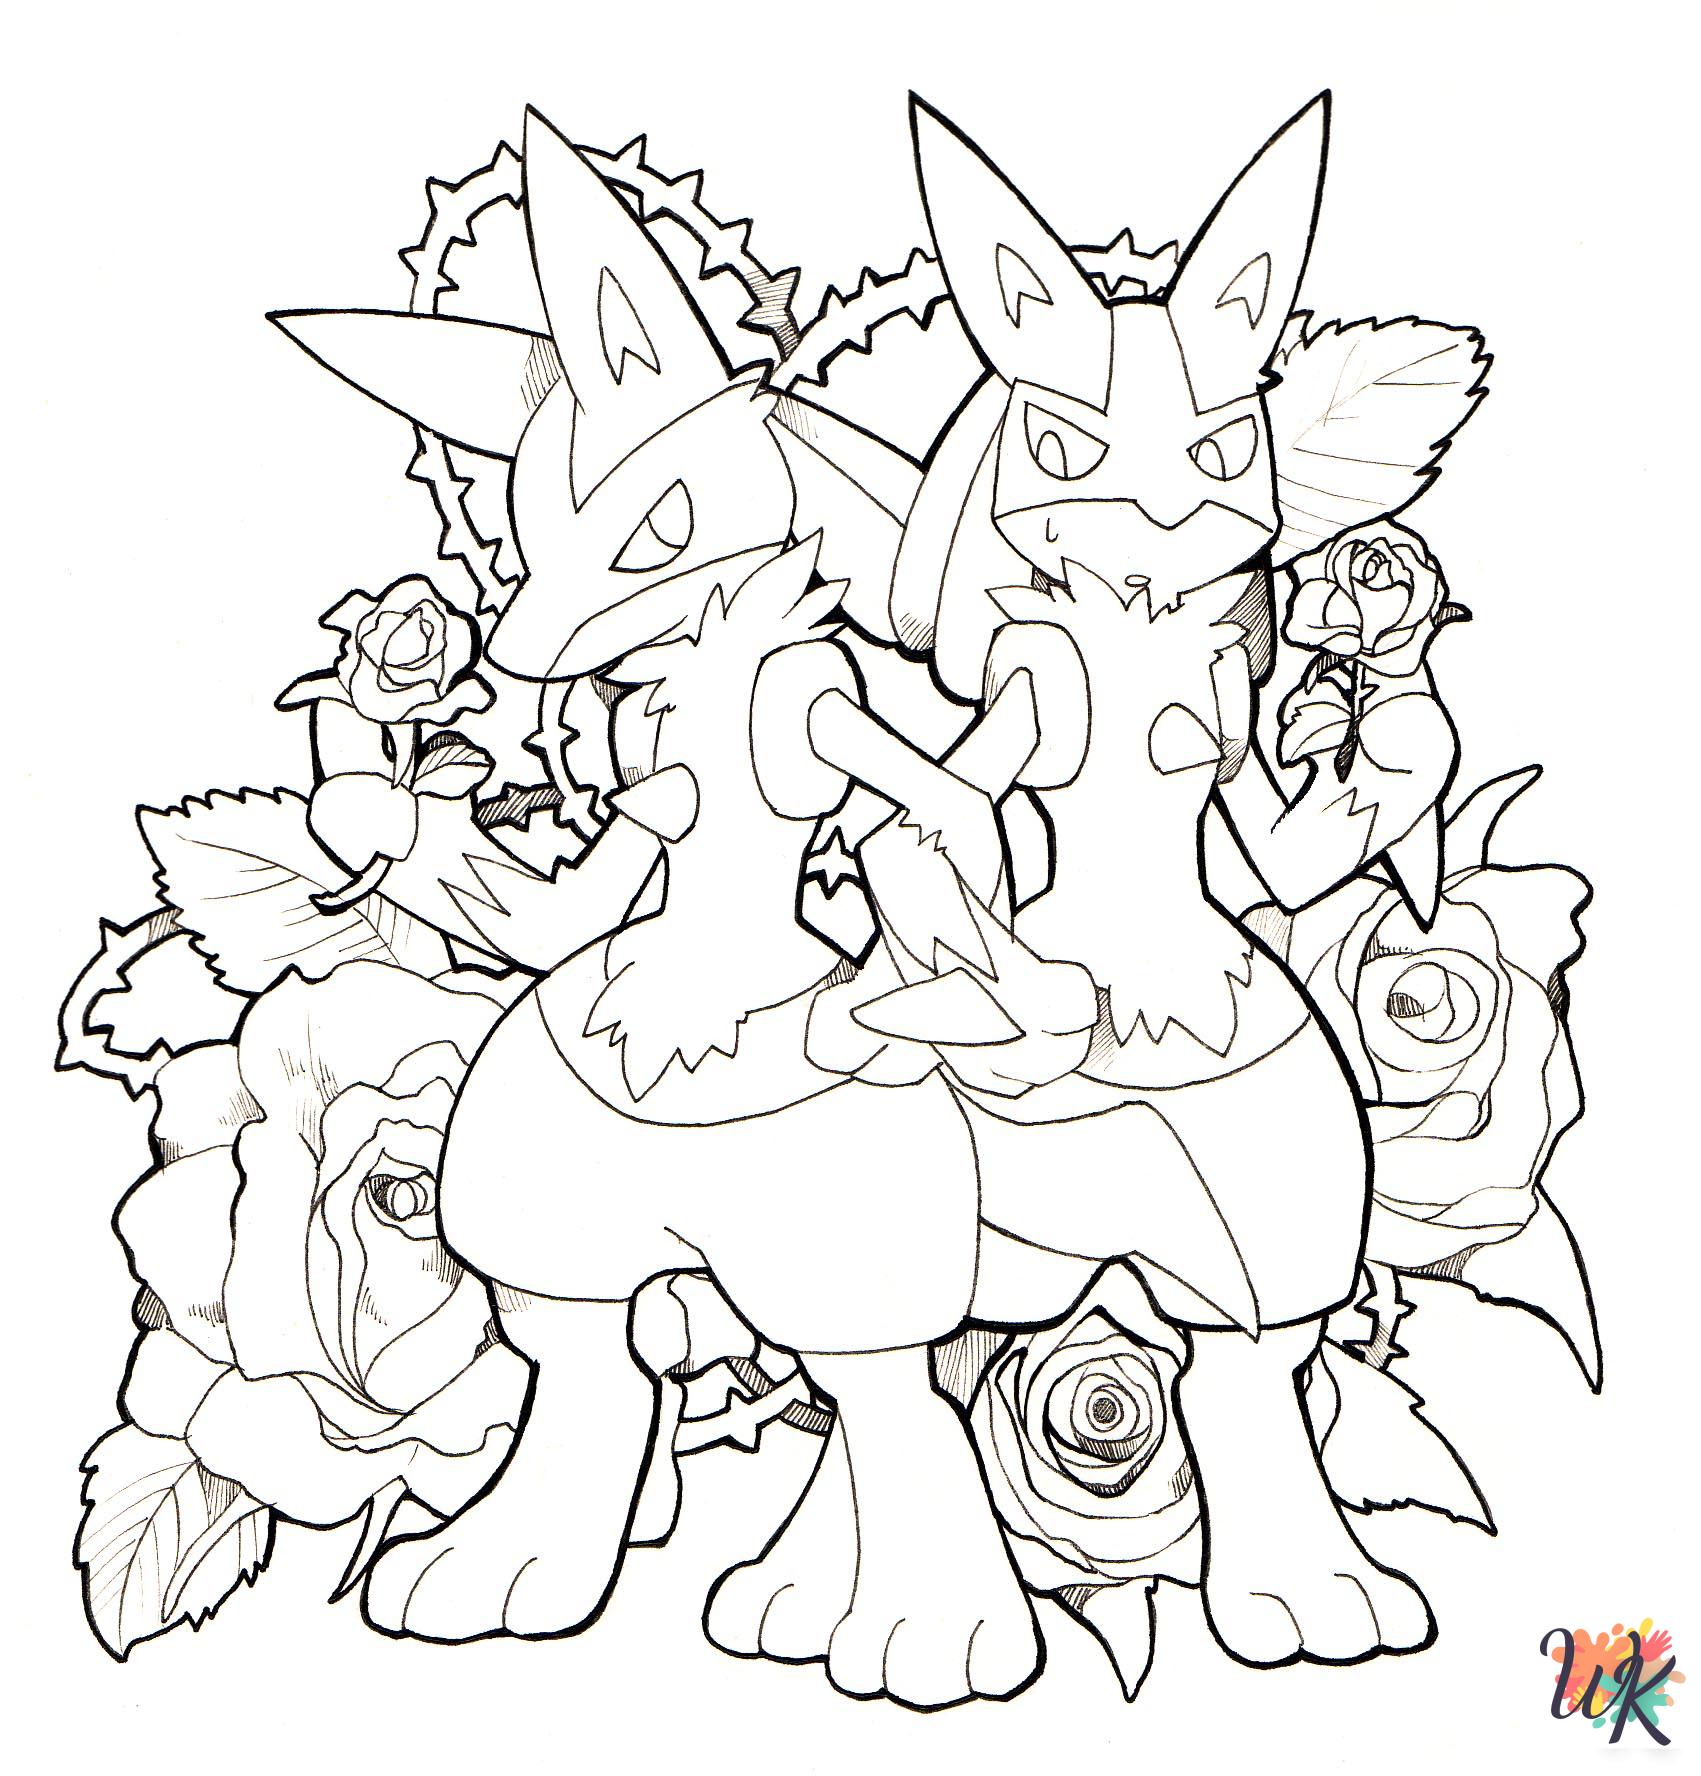 Lucario decorations coloring pages